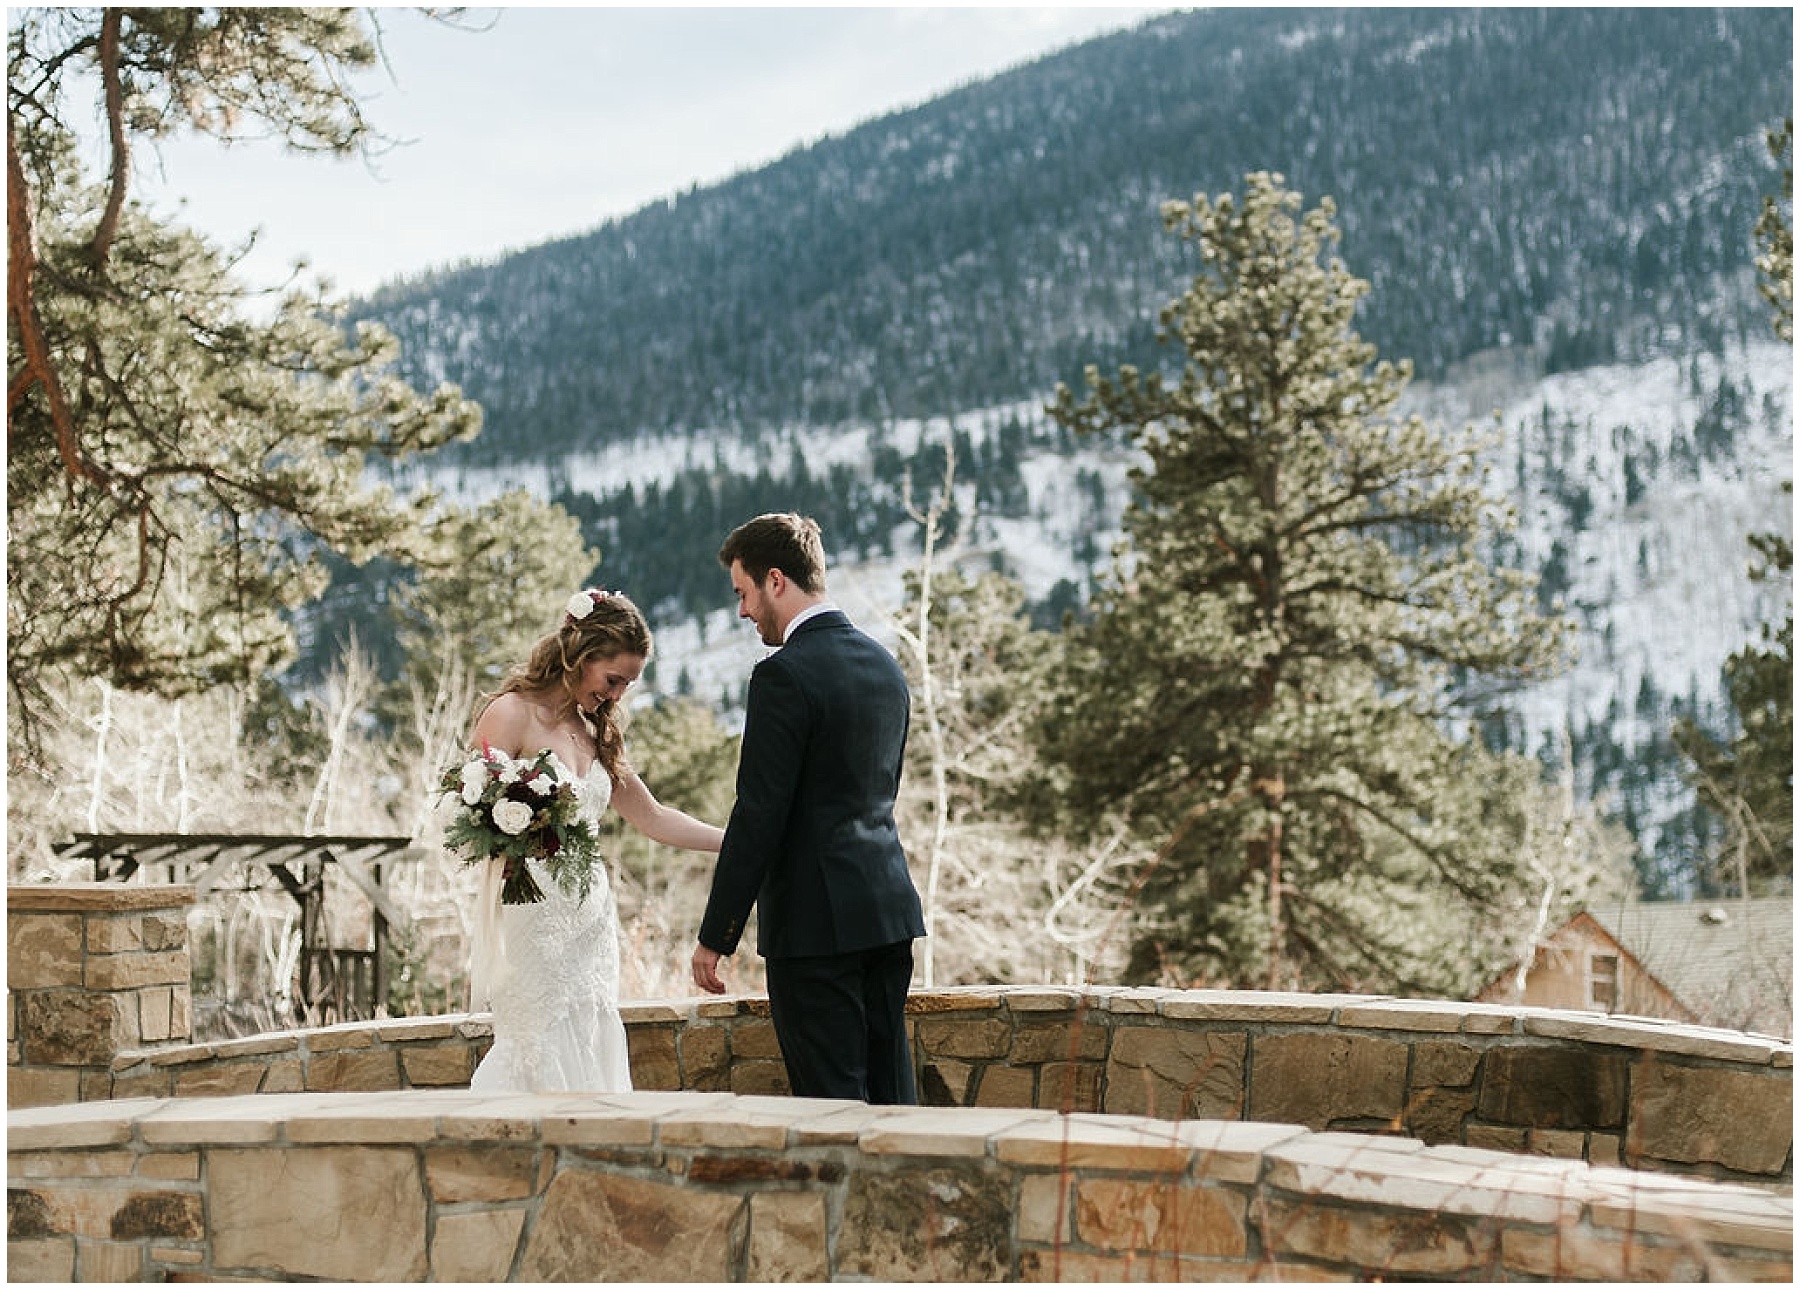 Katesalleyphotography-96_Haley and Dan get married in Estes Park.jpg